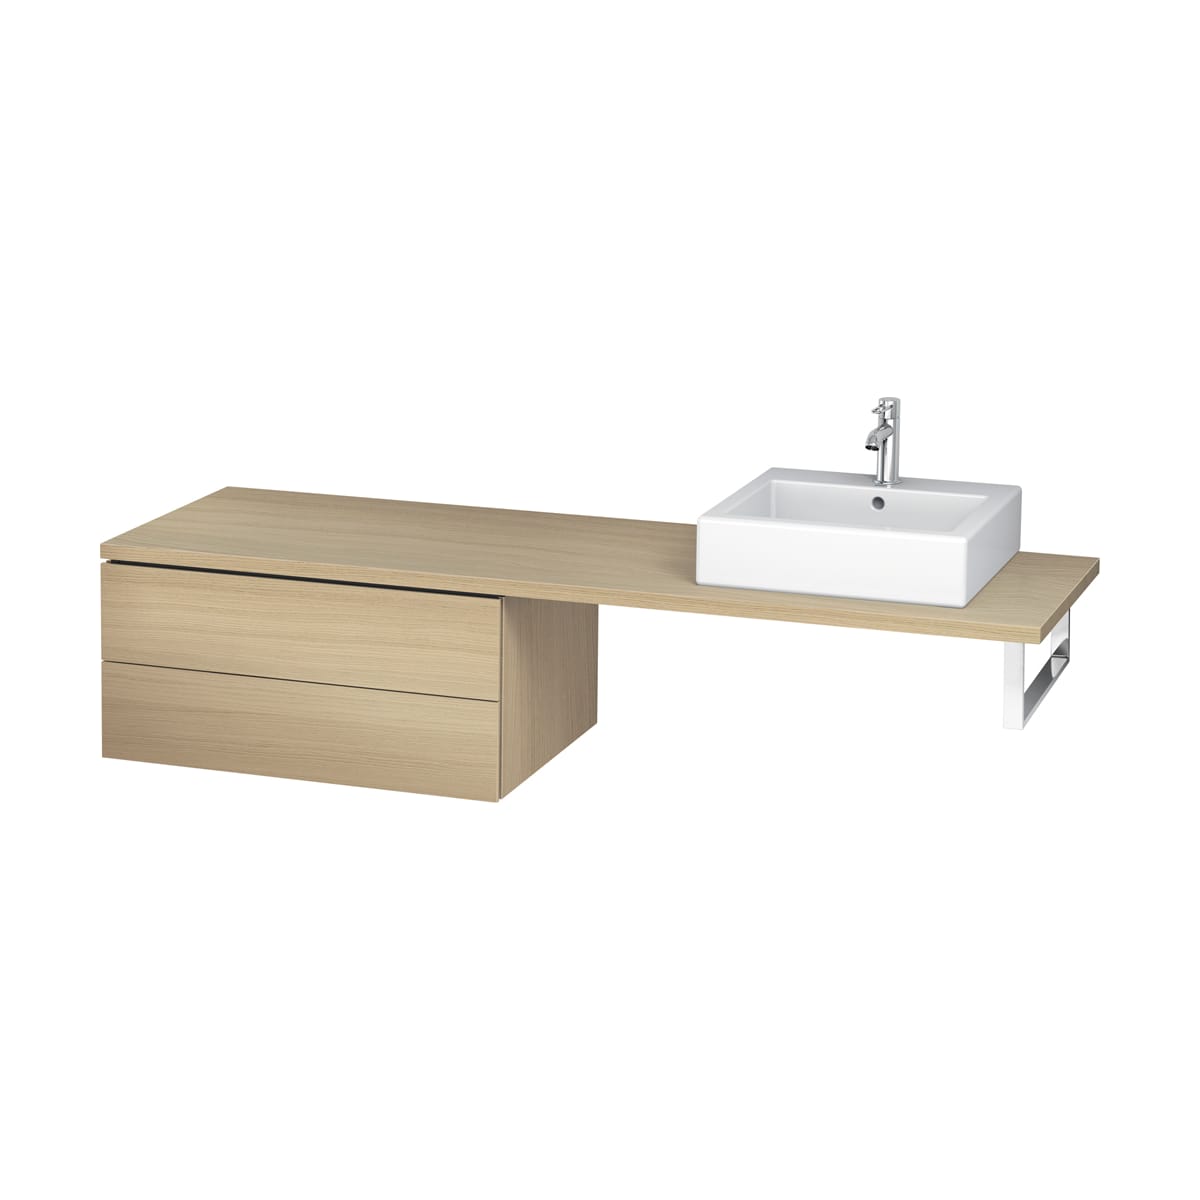 Duravit Lc687807171 L Cube 32 1 4 Wall, Wall Mounted Vanity Cabinet Only